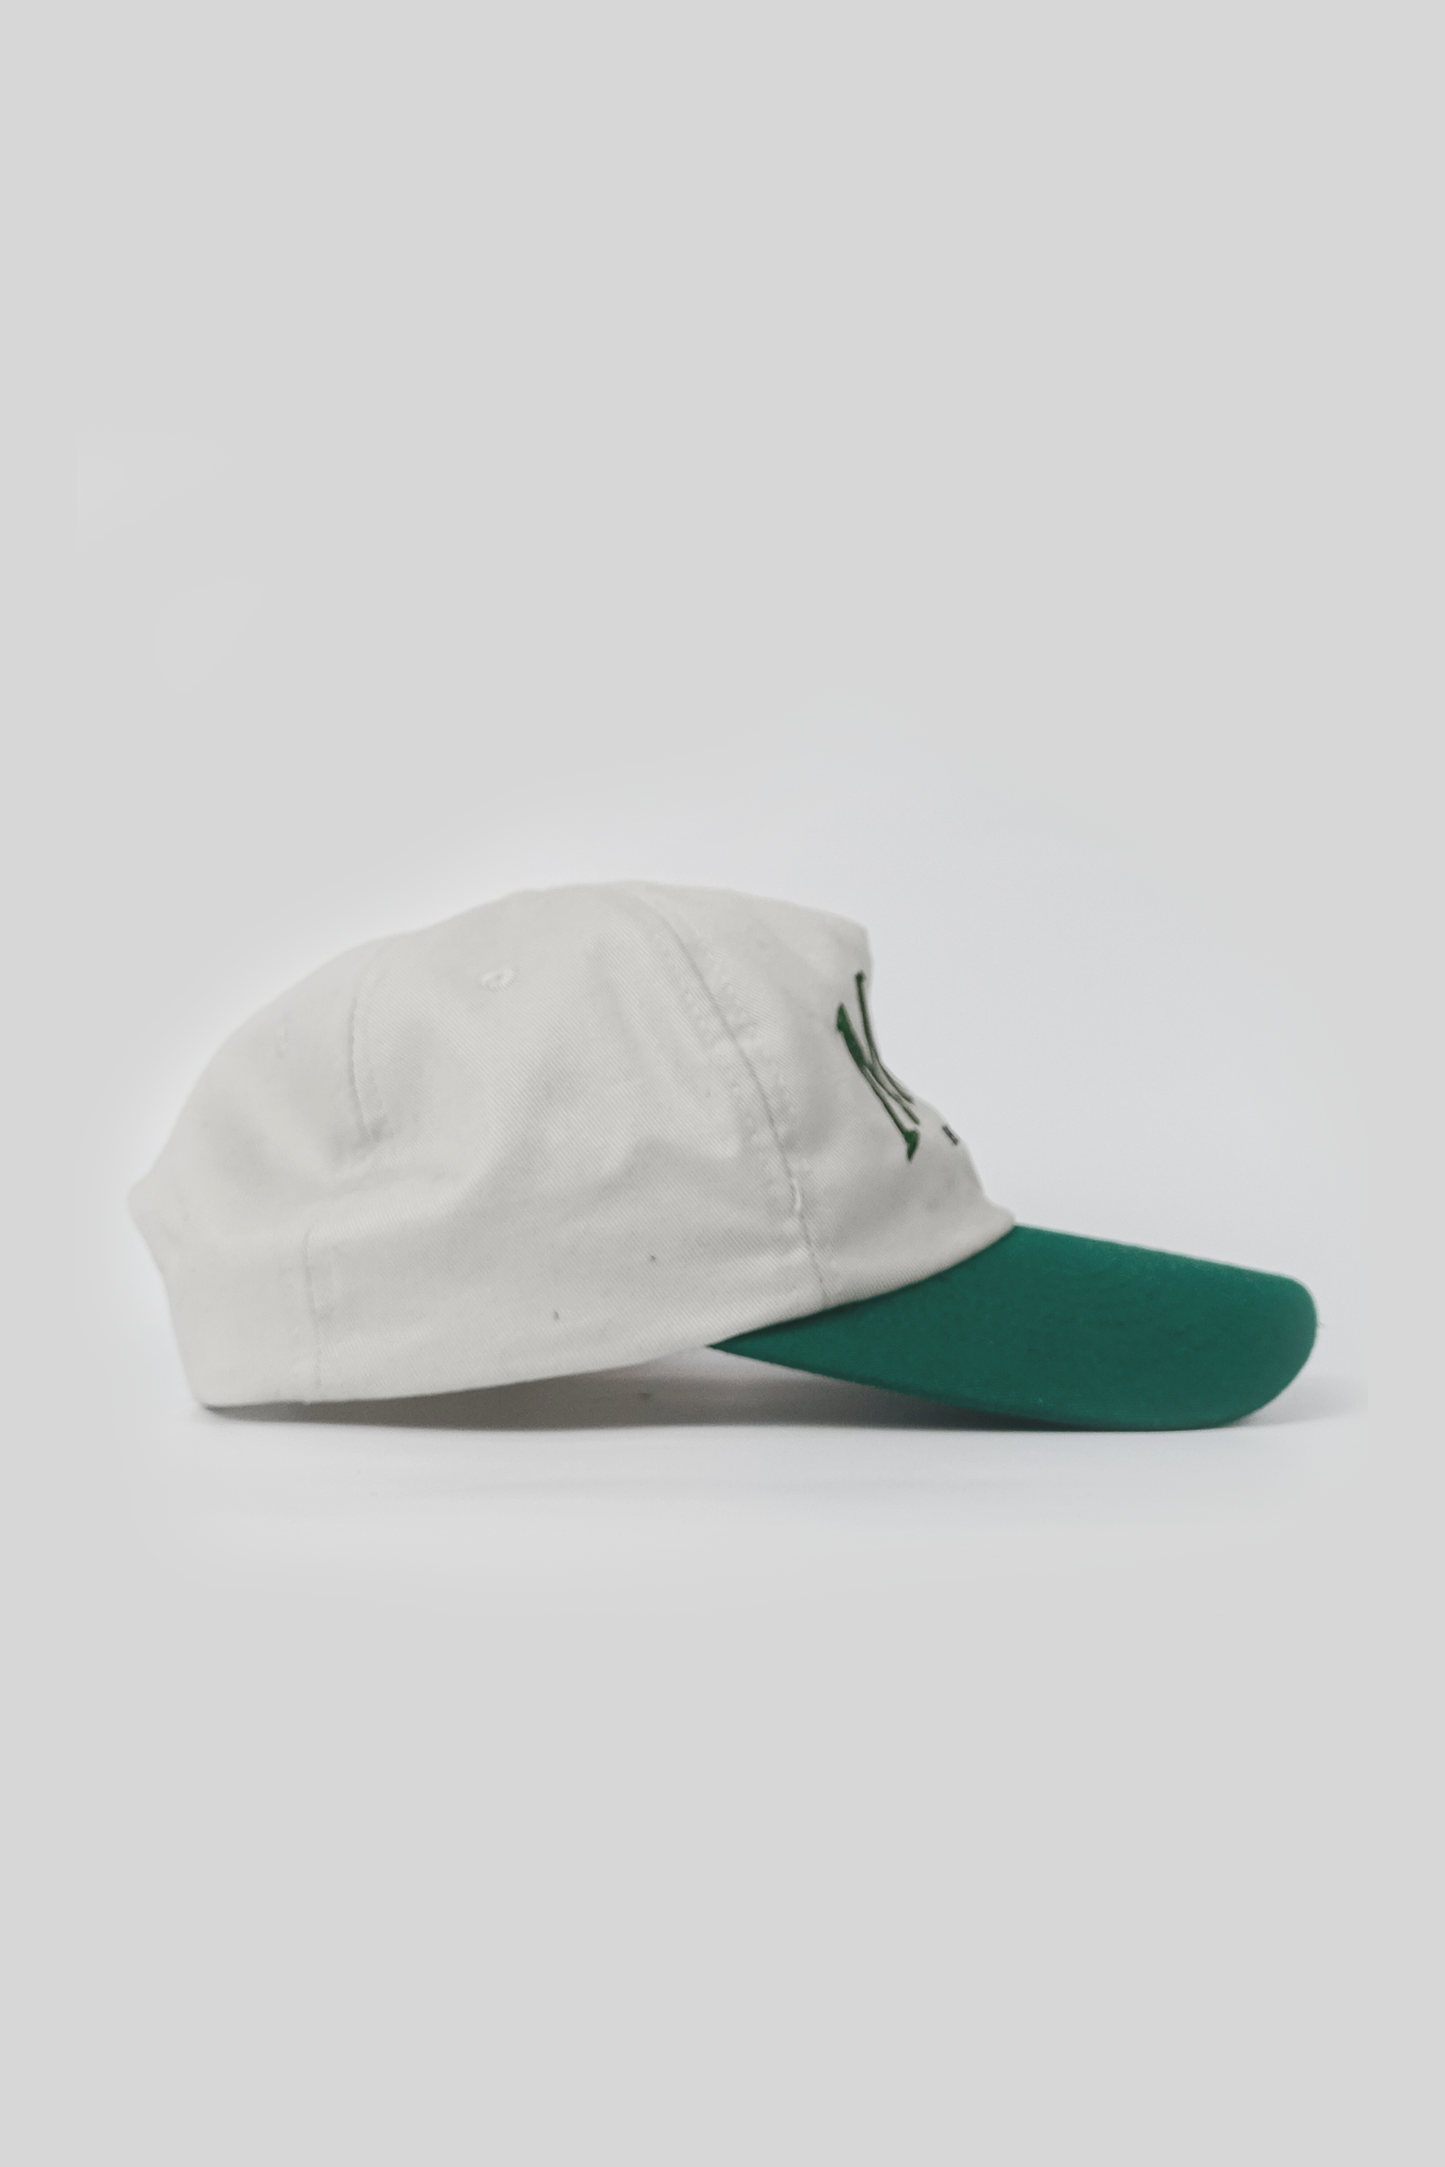 'this is not merch' Contrast Unstructured Cap